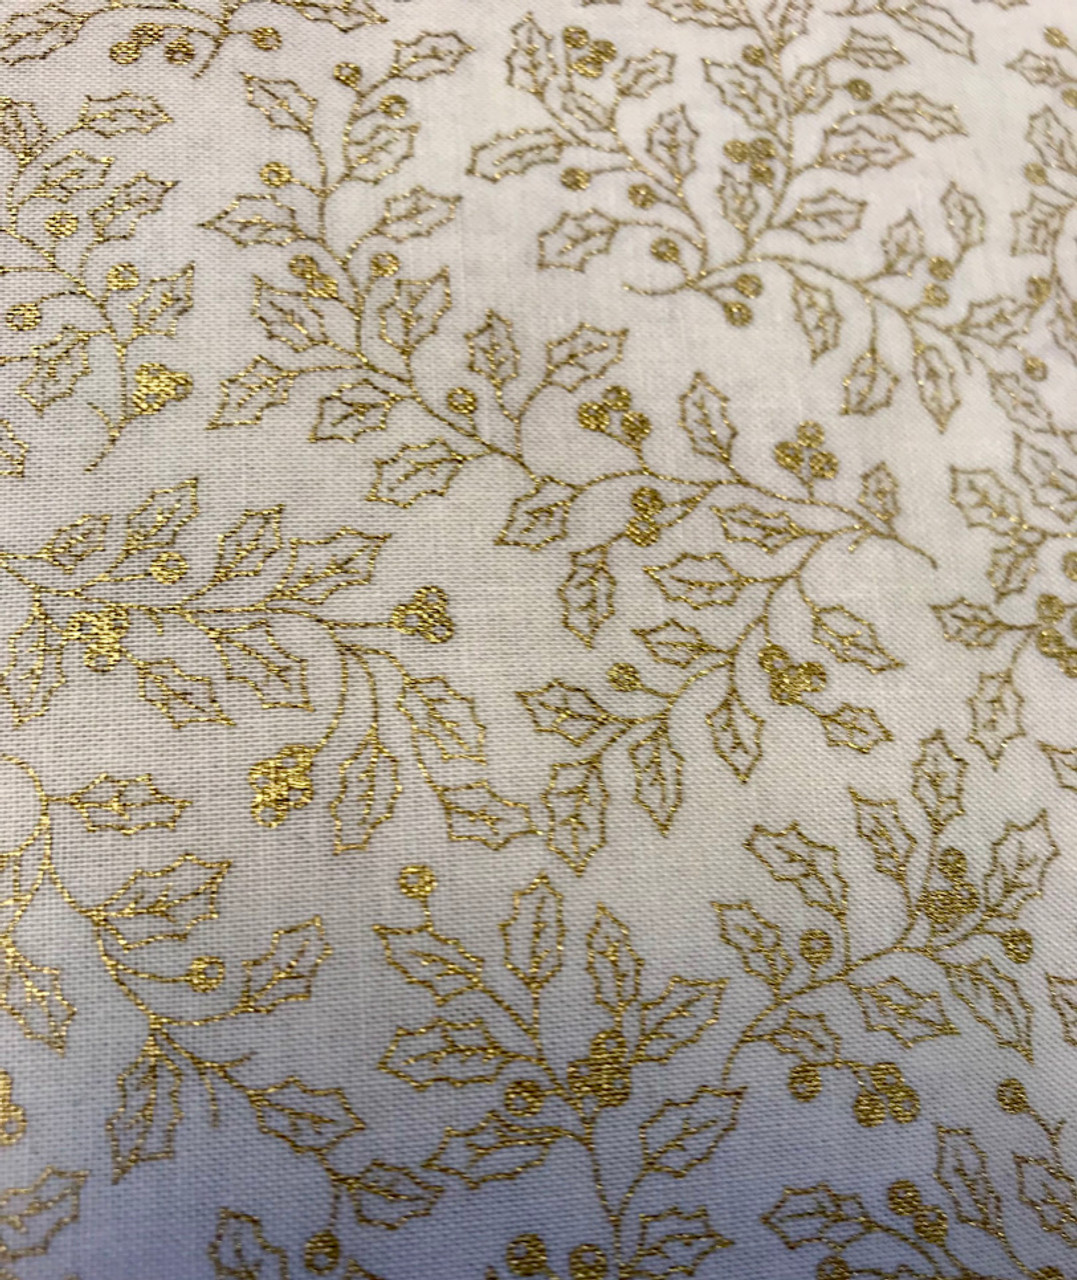 Gold Holly leaves on Cream - 100% Cotton Fabric, 135cm/53 in Wide, Sold Per HALF Metre